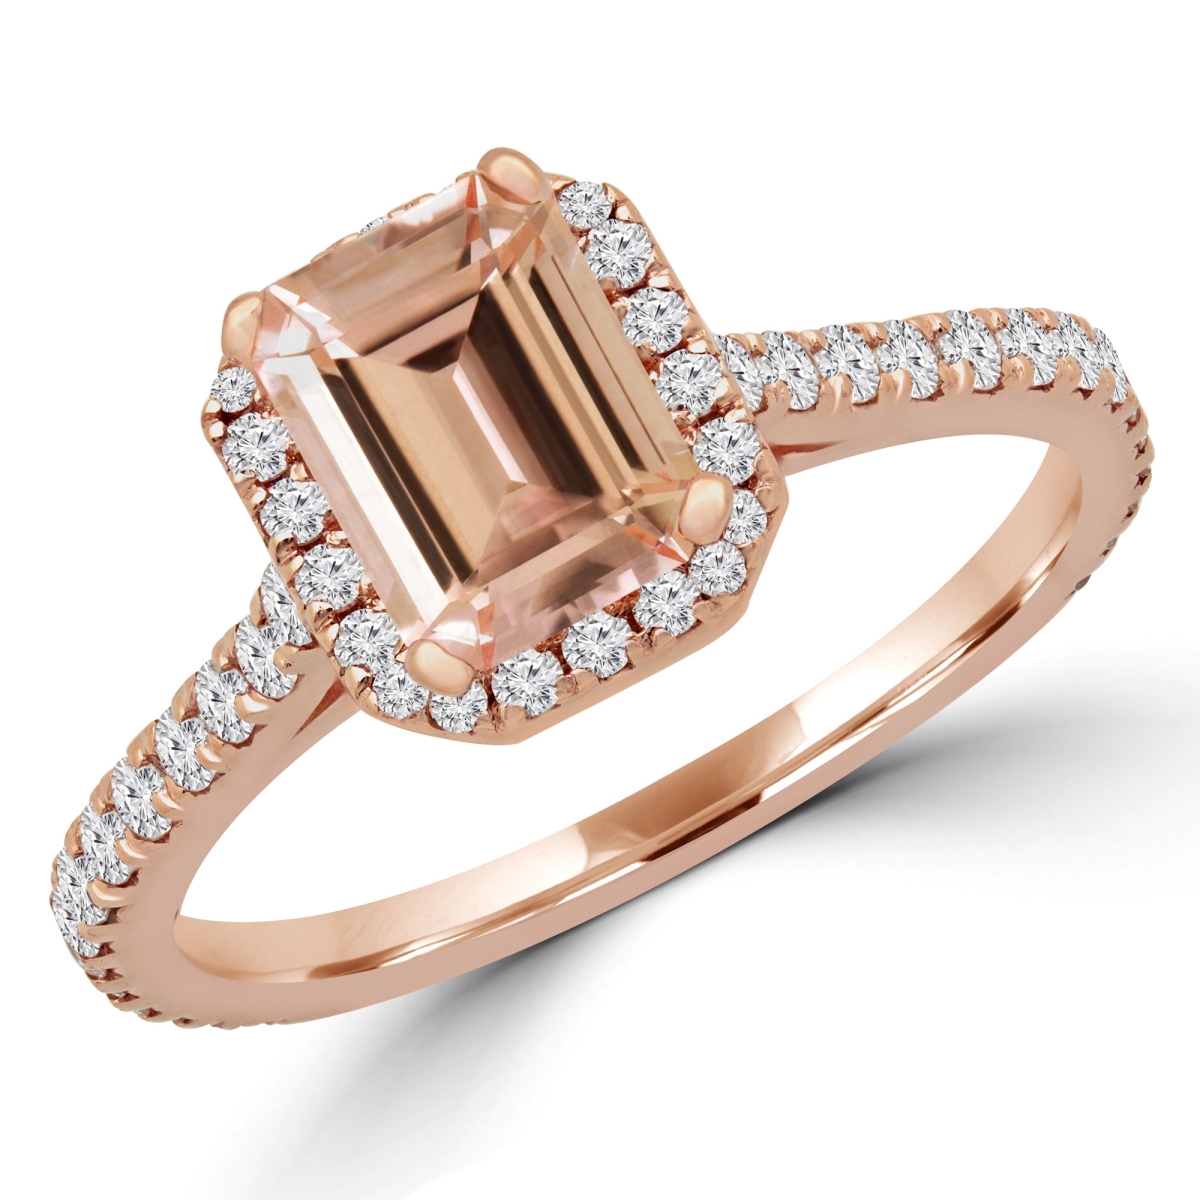 Picture of Majesty Diamonds MD180580-6 1.25 CTW Emerald Pink Morganite Halo Engagement Ring in 14K Rose Gold - Size 6